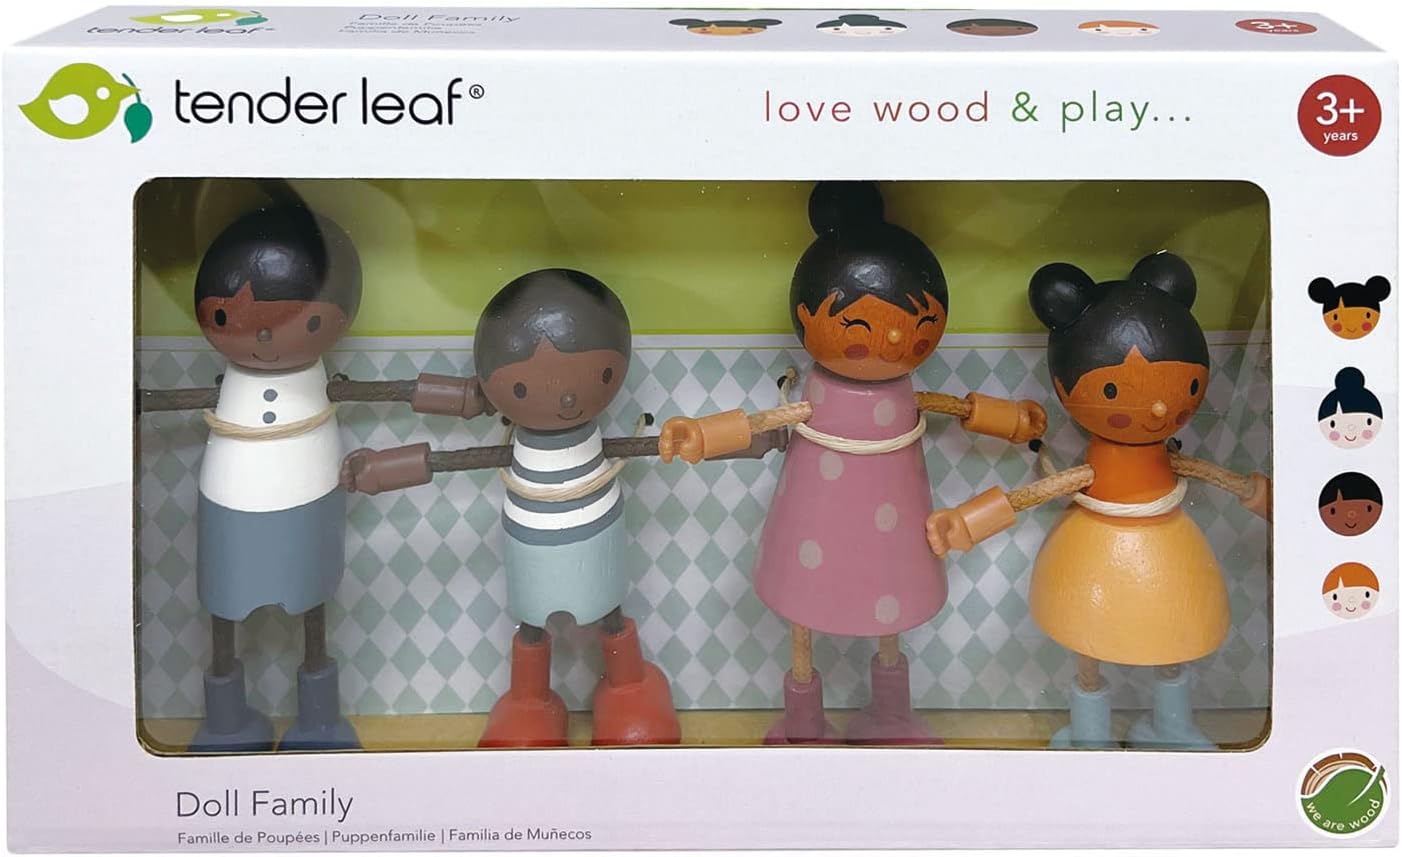 4 piece wooden black dollhouse family comes in window box package as shown